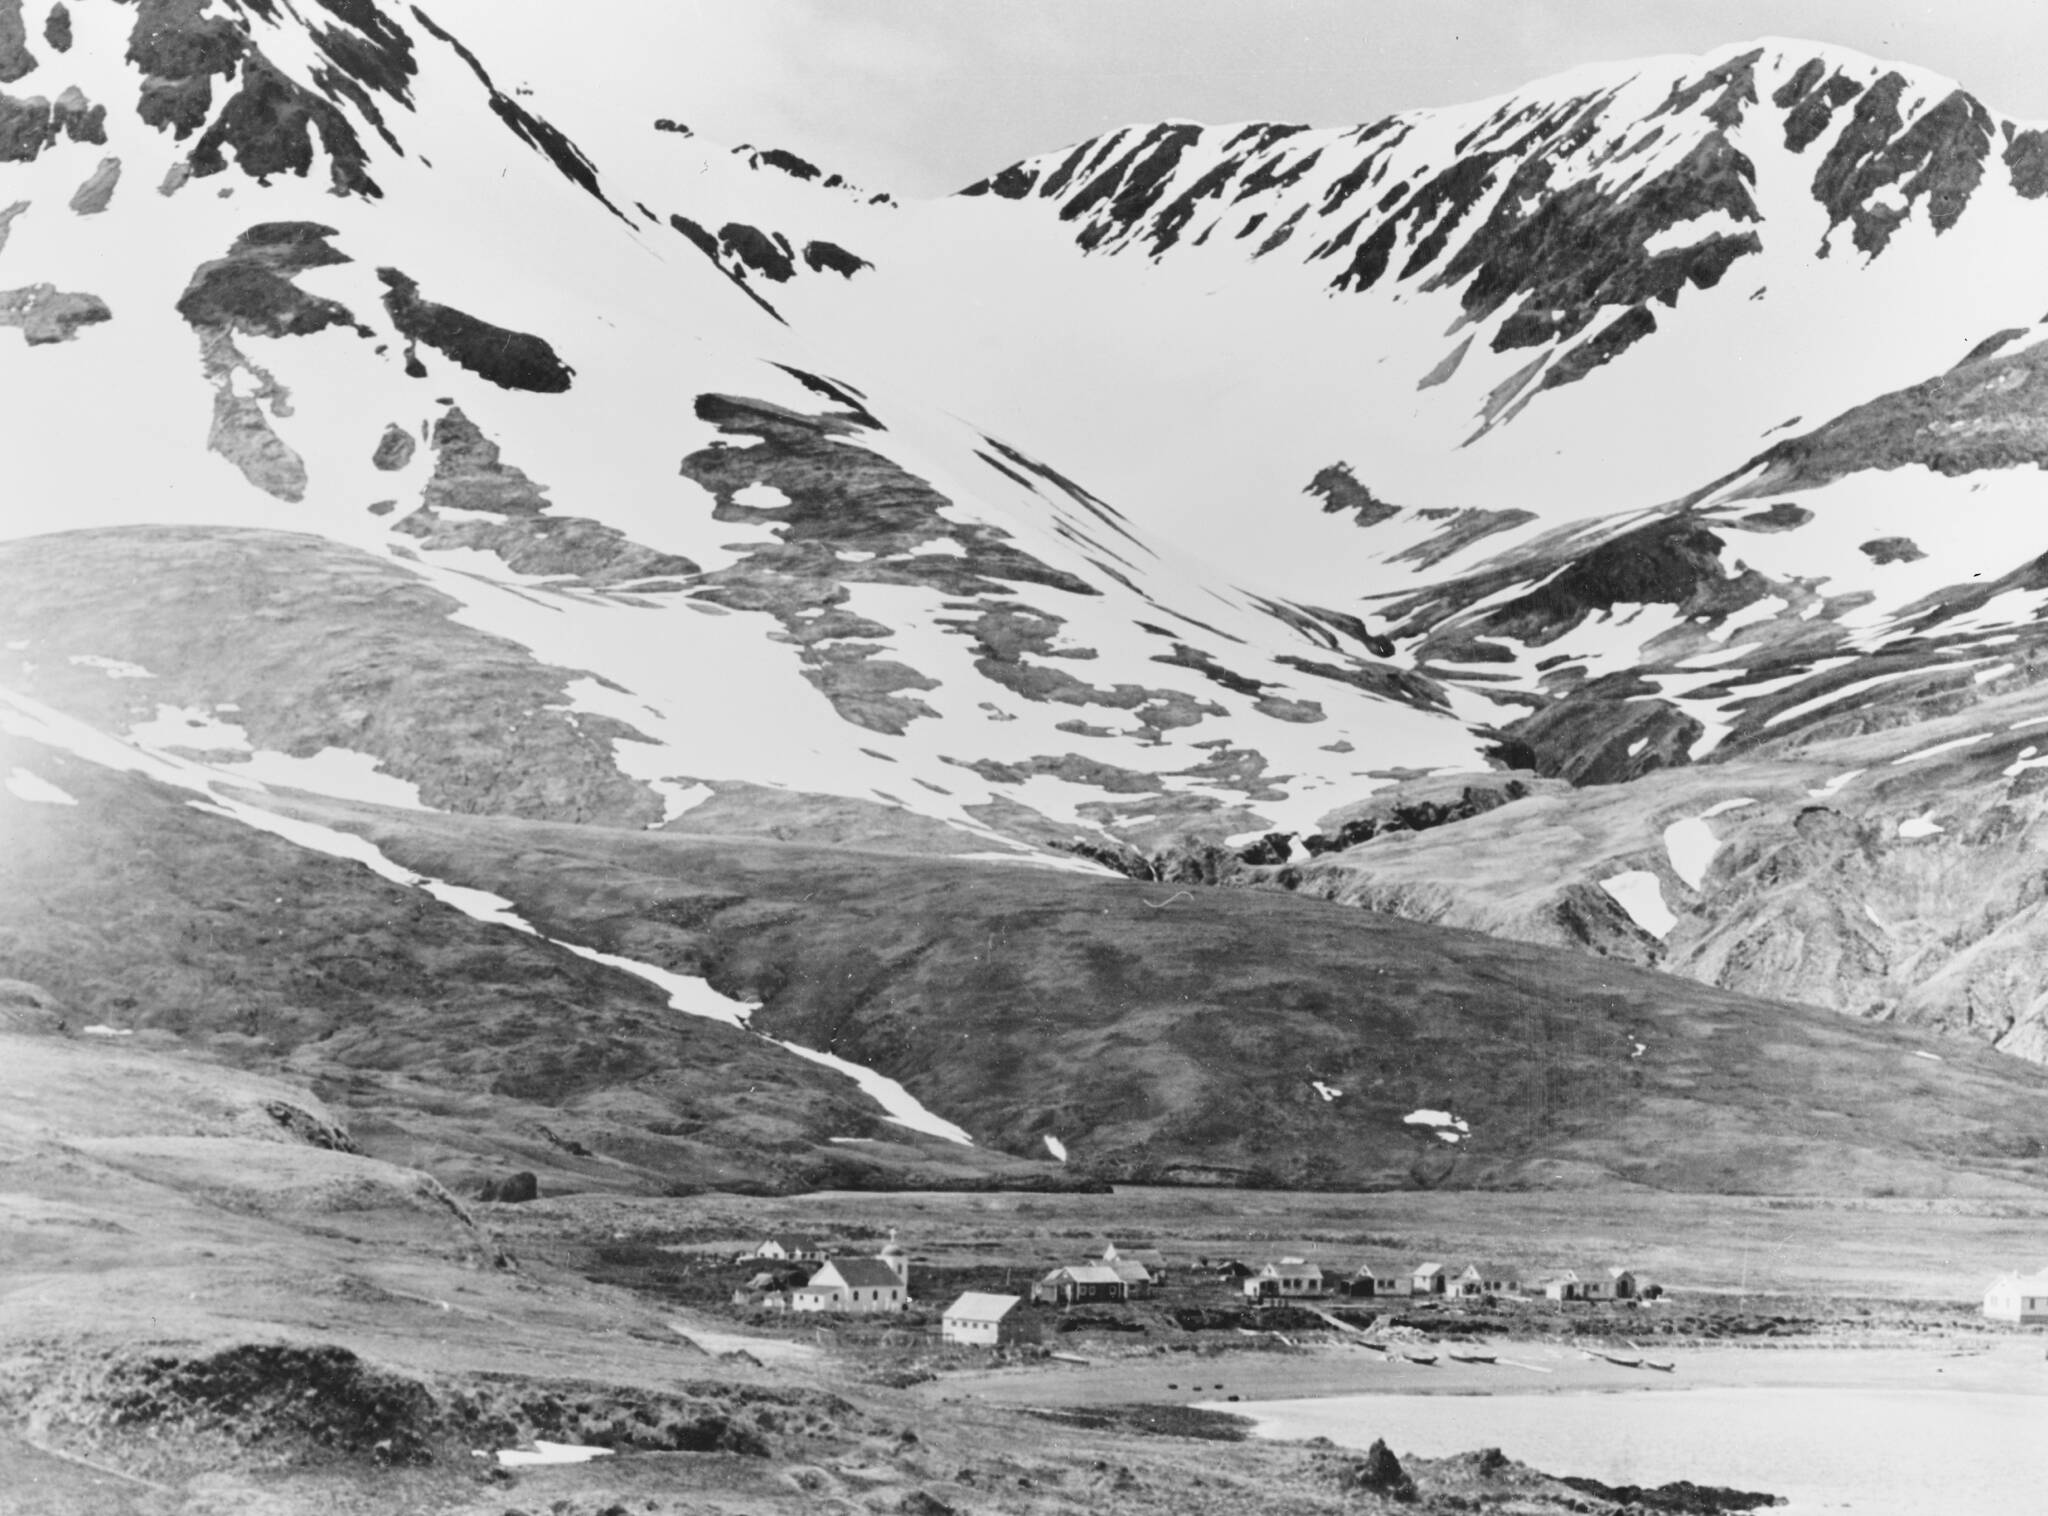 This photo provided by the Library of Congress shows the village of Attu, Alaska, in June 1937. Gregory Golodoff, who was 3 years old when his remote Alaska island was captured by Japanese troops and who became the last survivor among its 41 residents sent to Japan as prisoners, died Nov. 17, 2023. The island of Attu in the Aleutian chain was one of just a few U.S. territories taken by enemy forces during the war, and the American effort to reclaim it amid frigid rain, dense fog and hurricane-force winds was the only battle of the war fought on North American soil. (Courtesy of Library of Congress via AP)